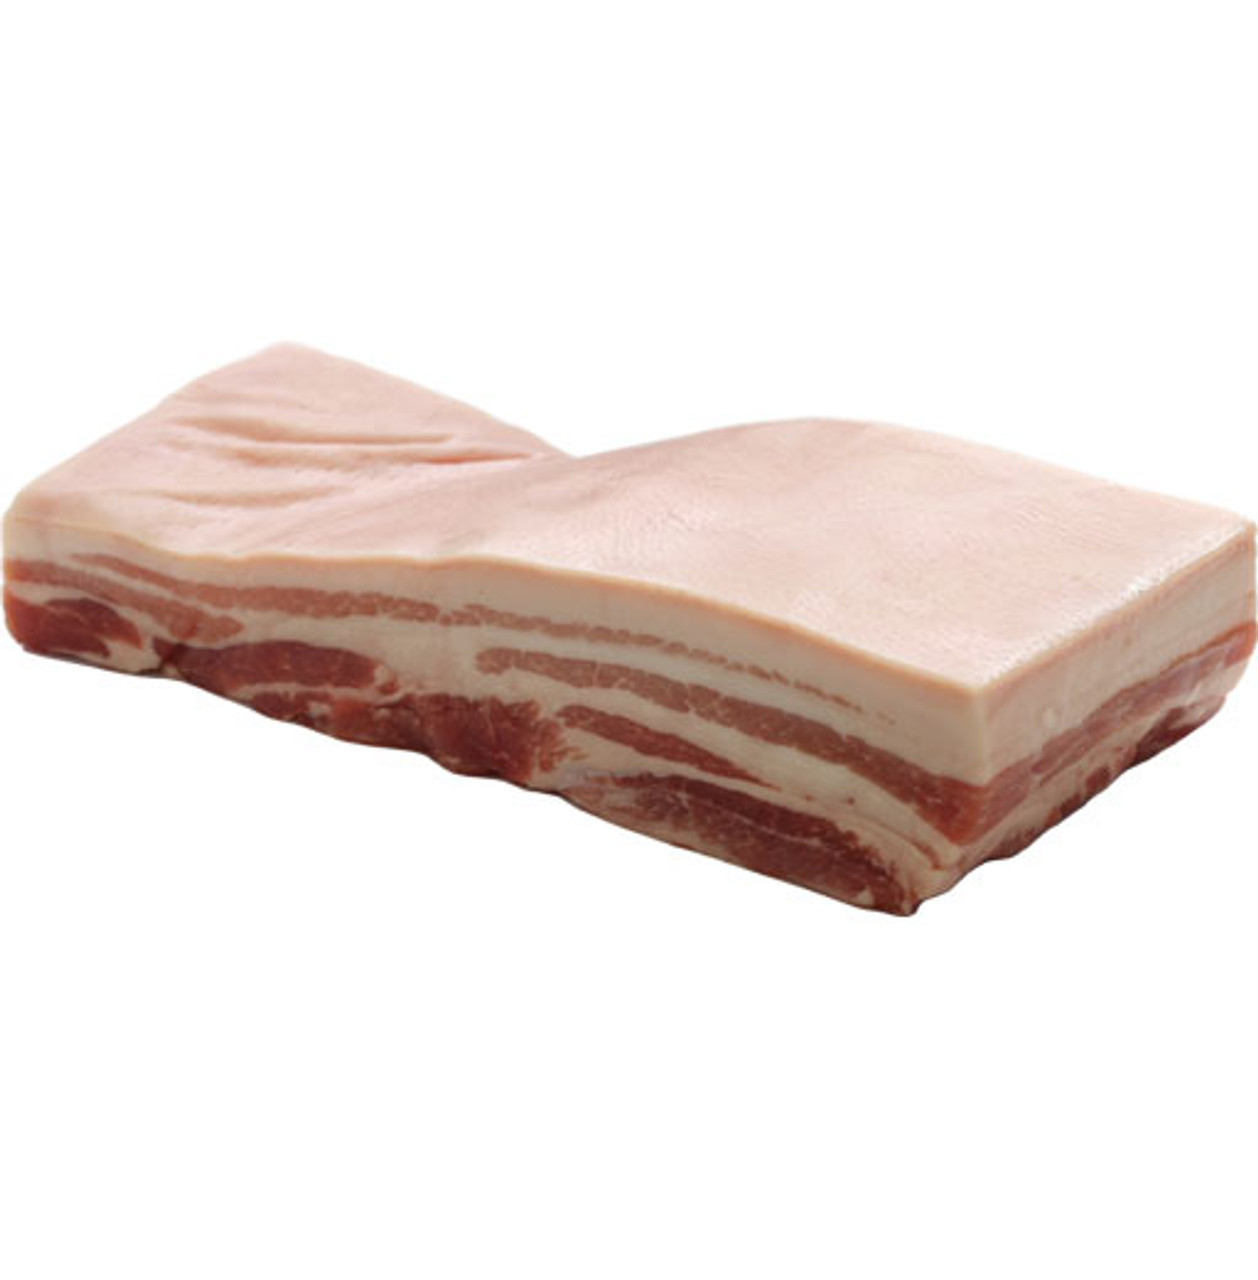 https://cdn11.bigcommerce.com/s-ul1e48c1/images/stencil/1280x1280/products/464/1537/Meat---Pork-Belly__23776.1698777287.jpg?c=2